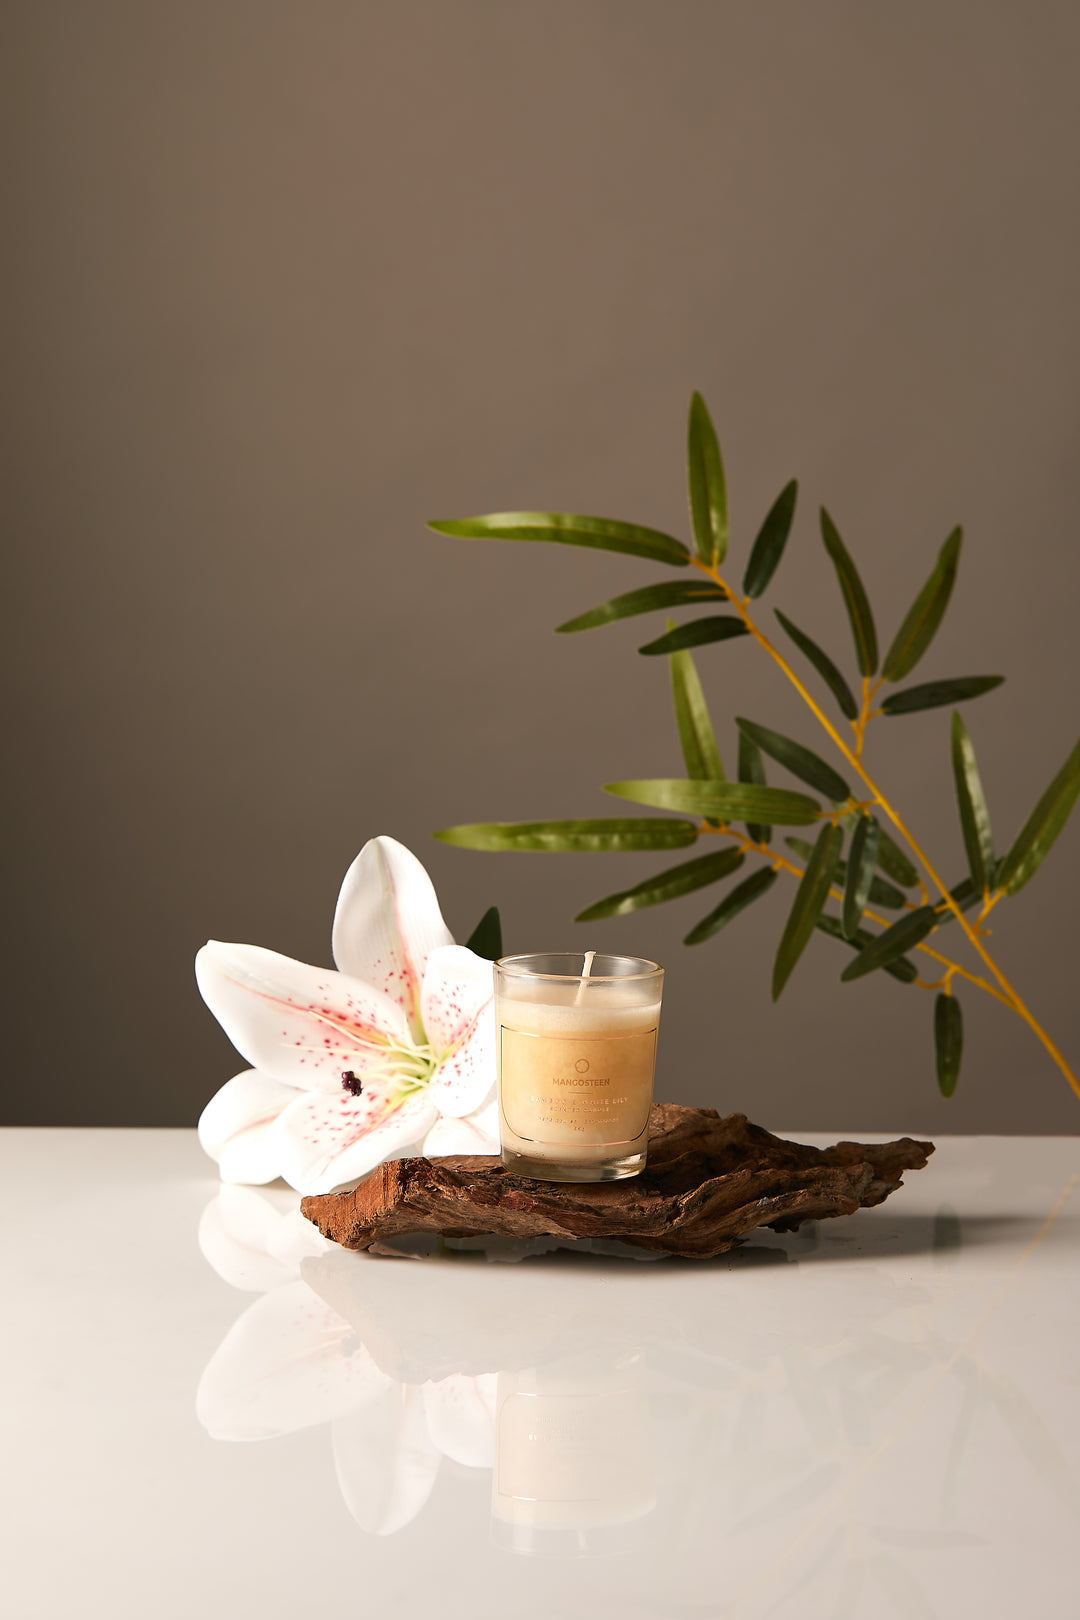 Bamboo & White Lily Soy Candle - 65g